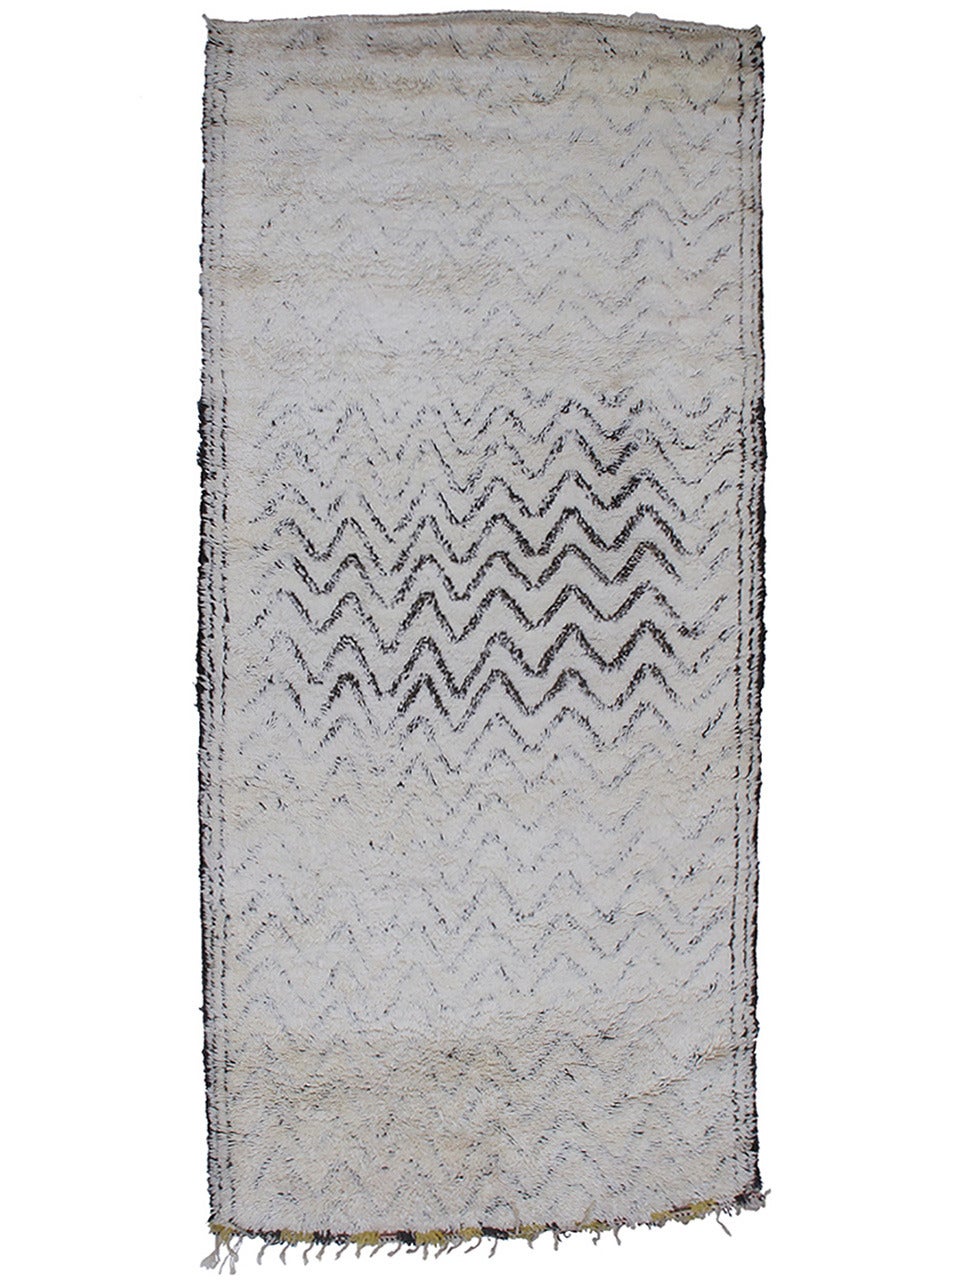 A great Moroccan Berber carpet by the Beni Ouarain tribes of the NE Middle Atlas Mountains, originally intended for use as a bed for the weaver's family.

The design featuring zigzag stripes is highly unusual and is partially covered by the thick